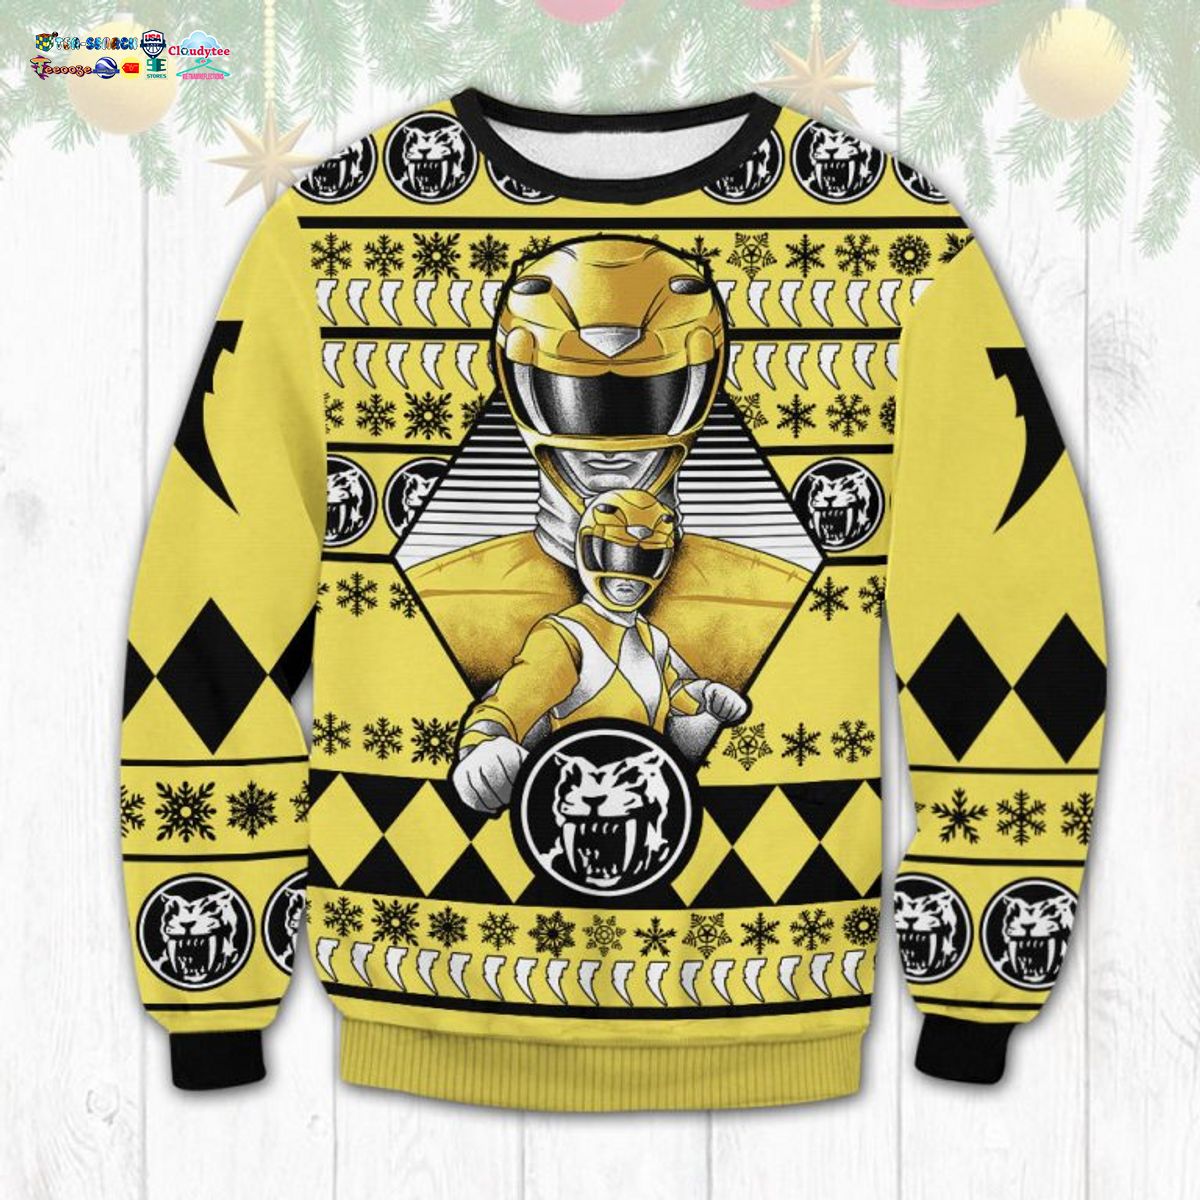 Yellow Power Rangers Ugly Christmas Sweater - Wow, cute pie